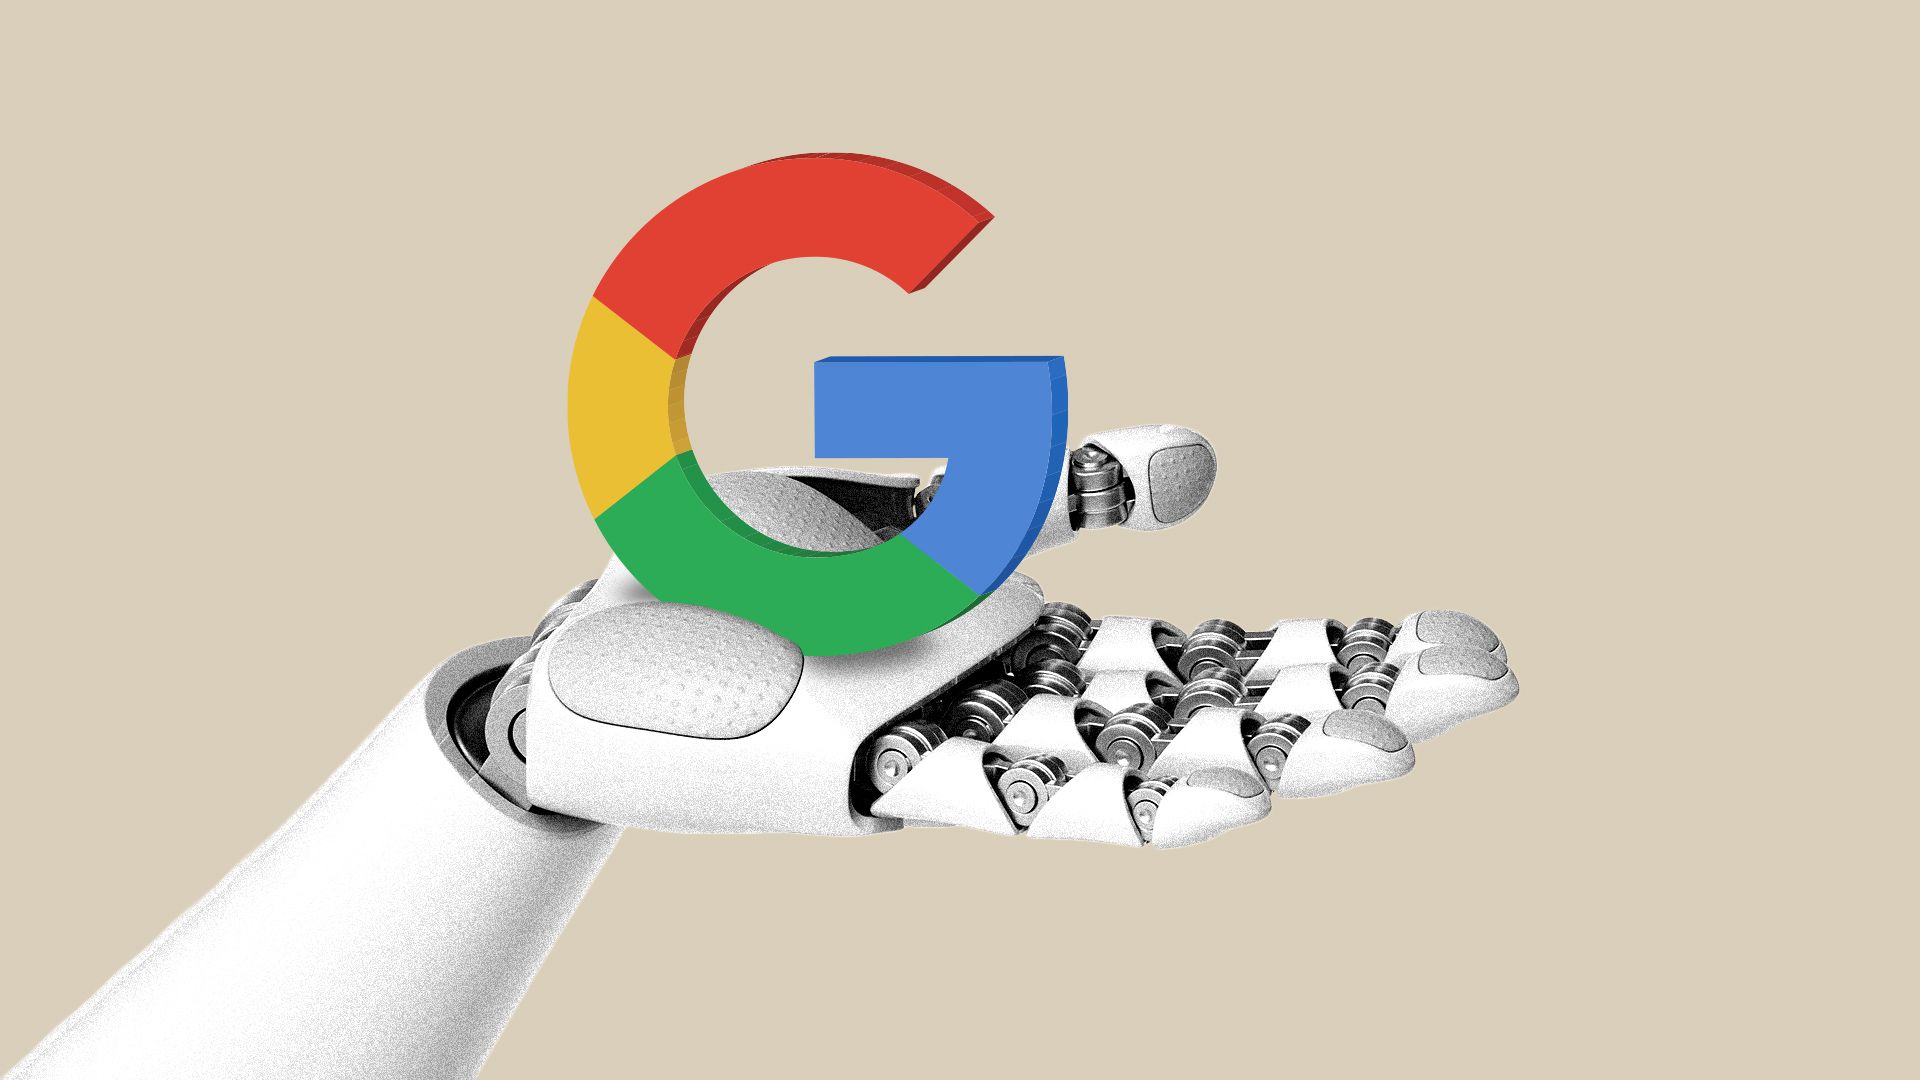 Illustration of a robot hand holding up the Google G